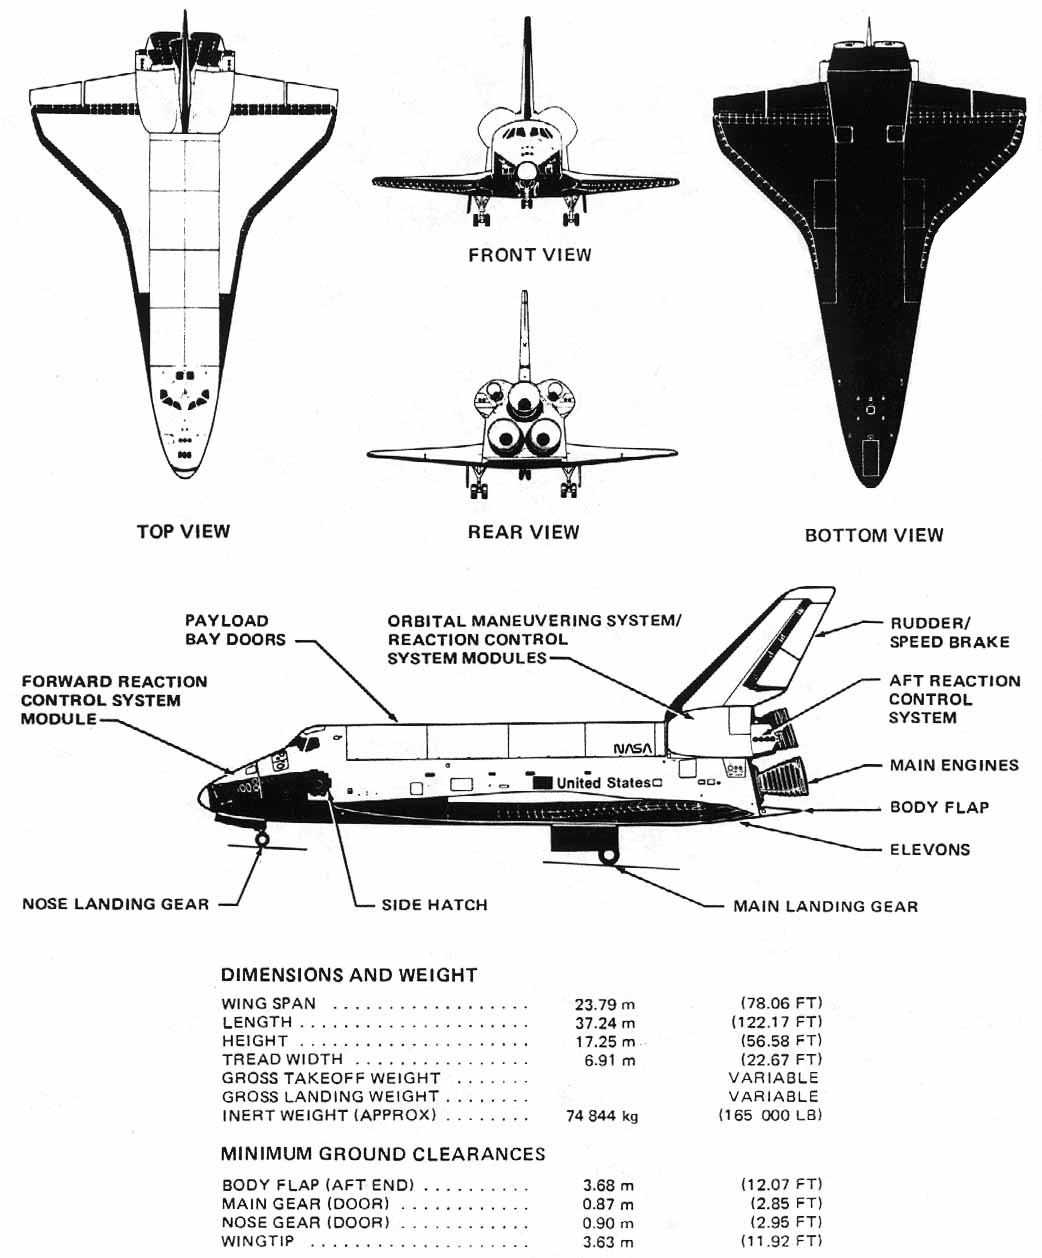 side, foward and topside drawing of Shuttle spacecraft with specification data